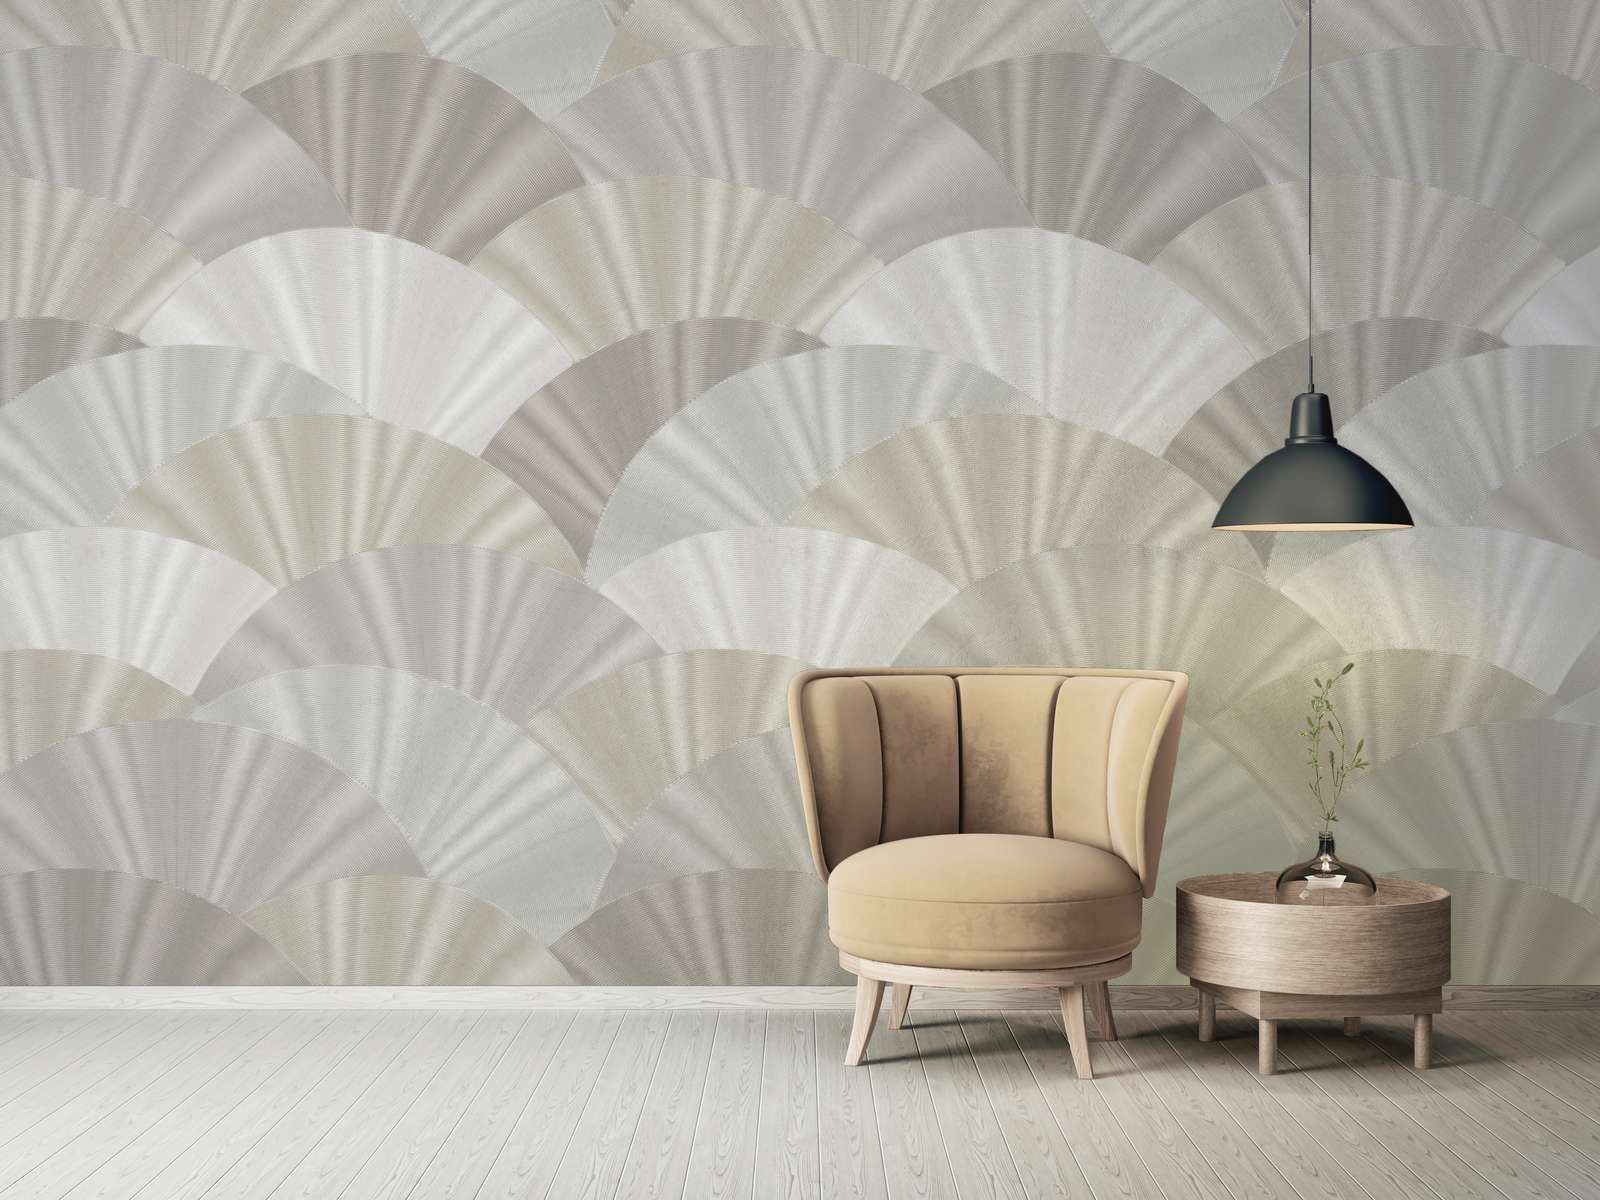             Non-woven wallpaper fan pattern with fabric look - grey, silver
        